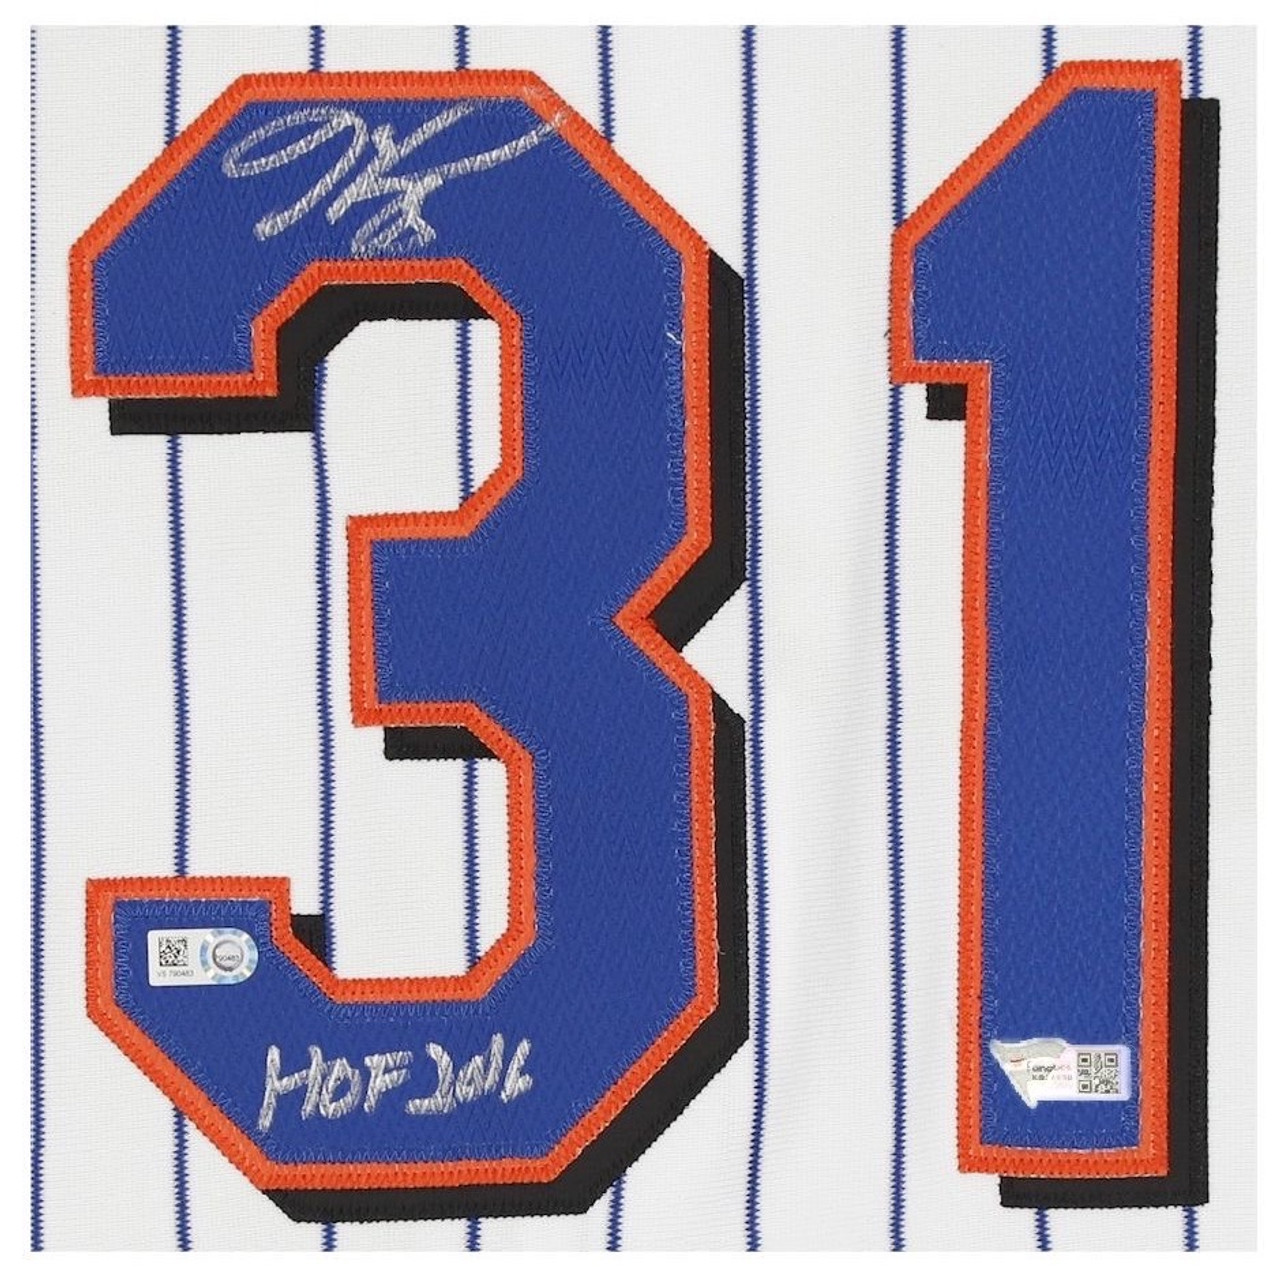 MIKE PIAZZA Autographed HOF 2016 Mets Authentic Pinstripe Jersey FANATICS  - Game Day Legends